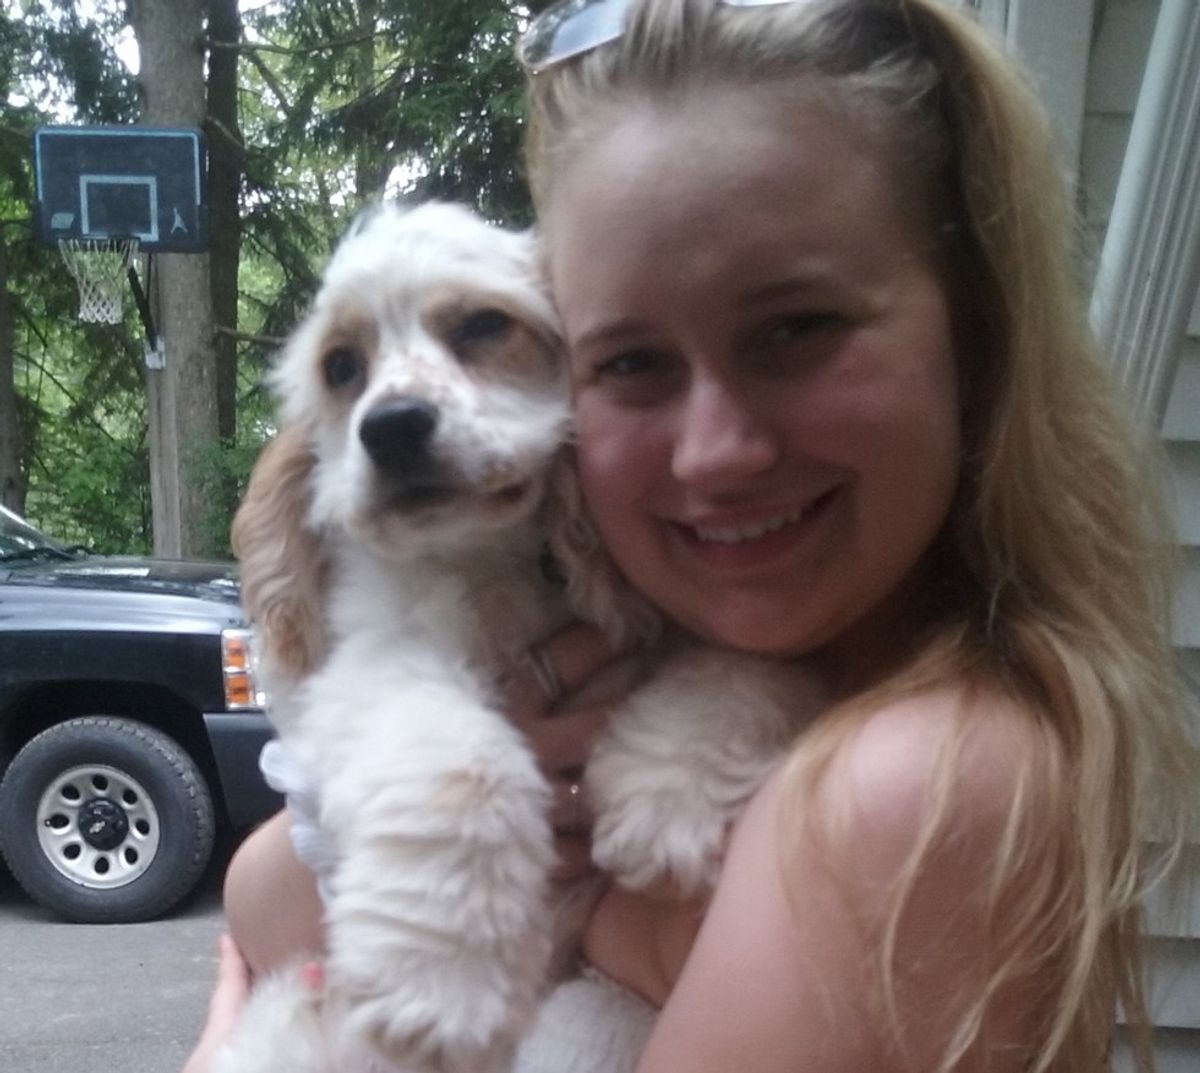 11 Things I've Learned From Having A Puppy